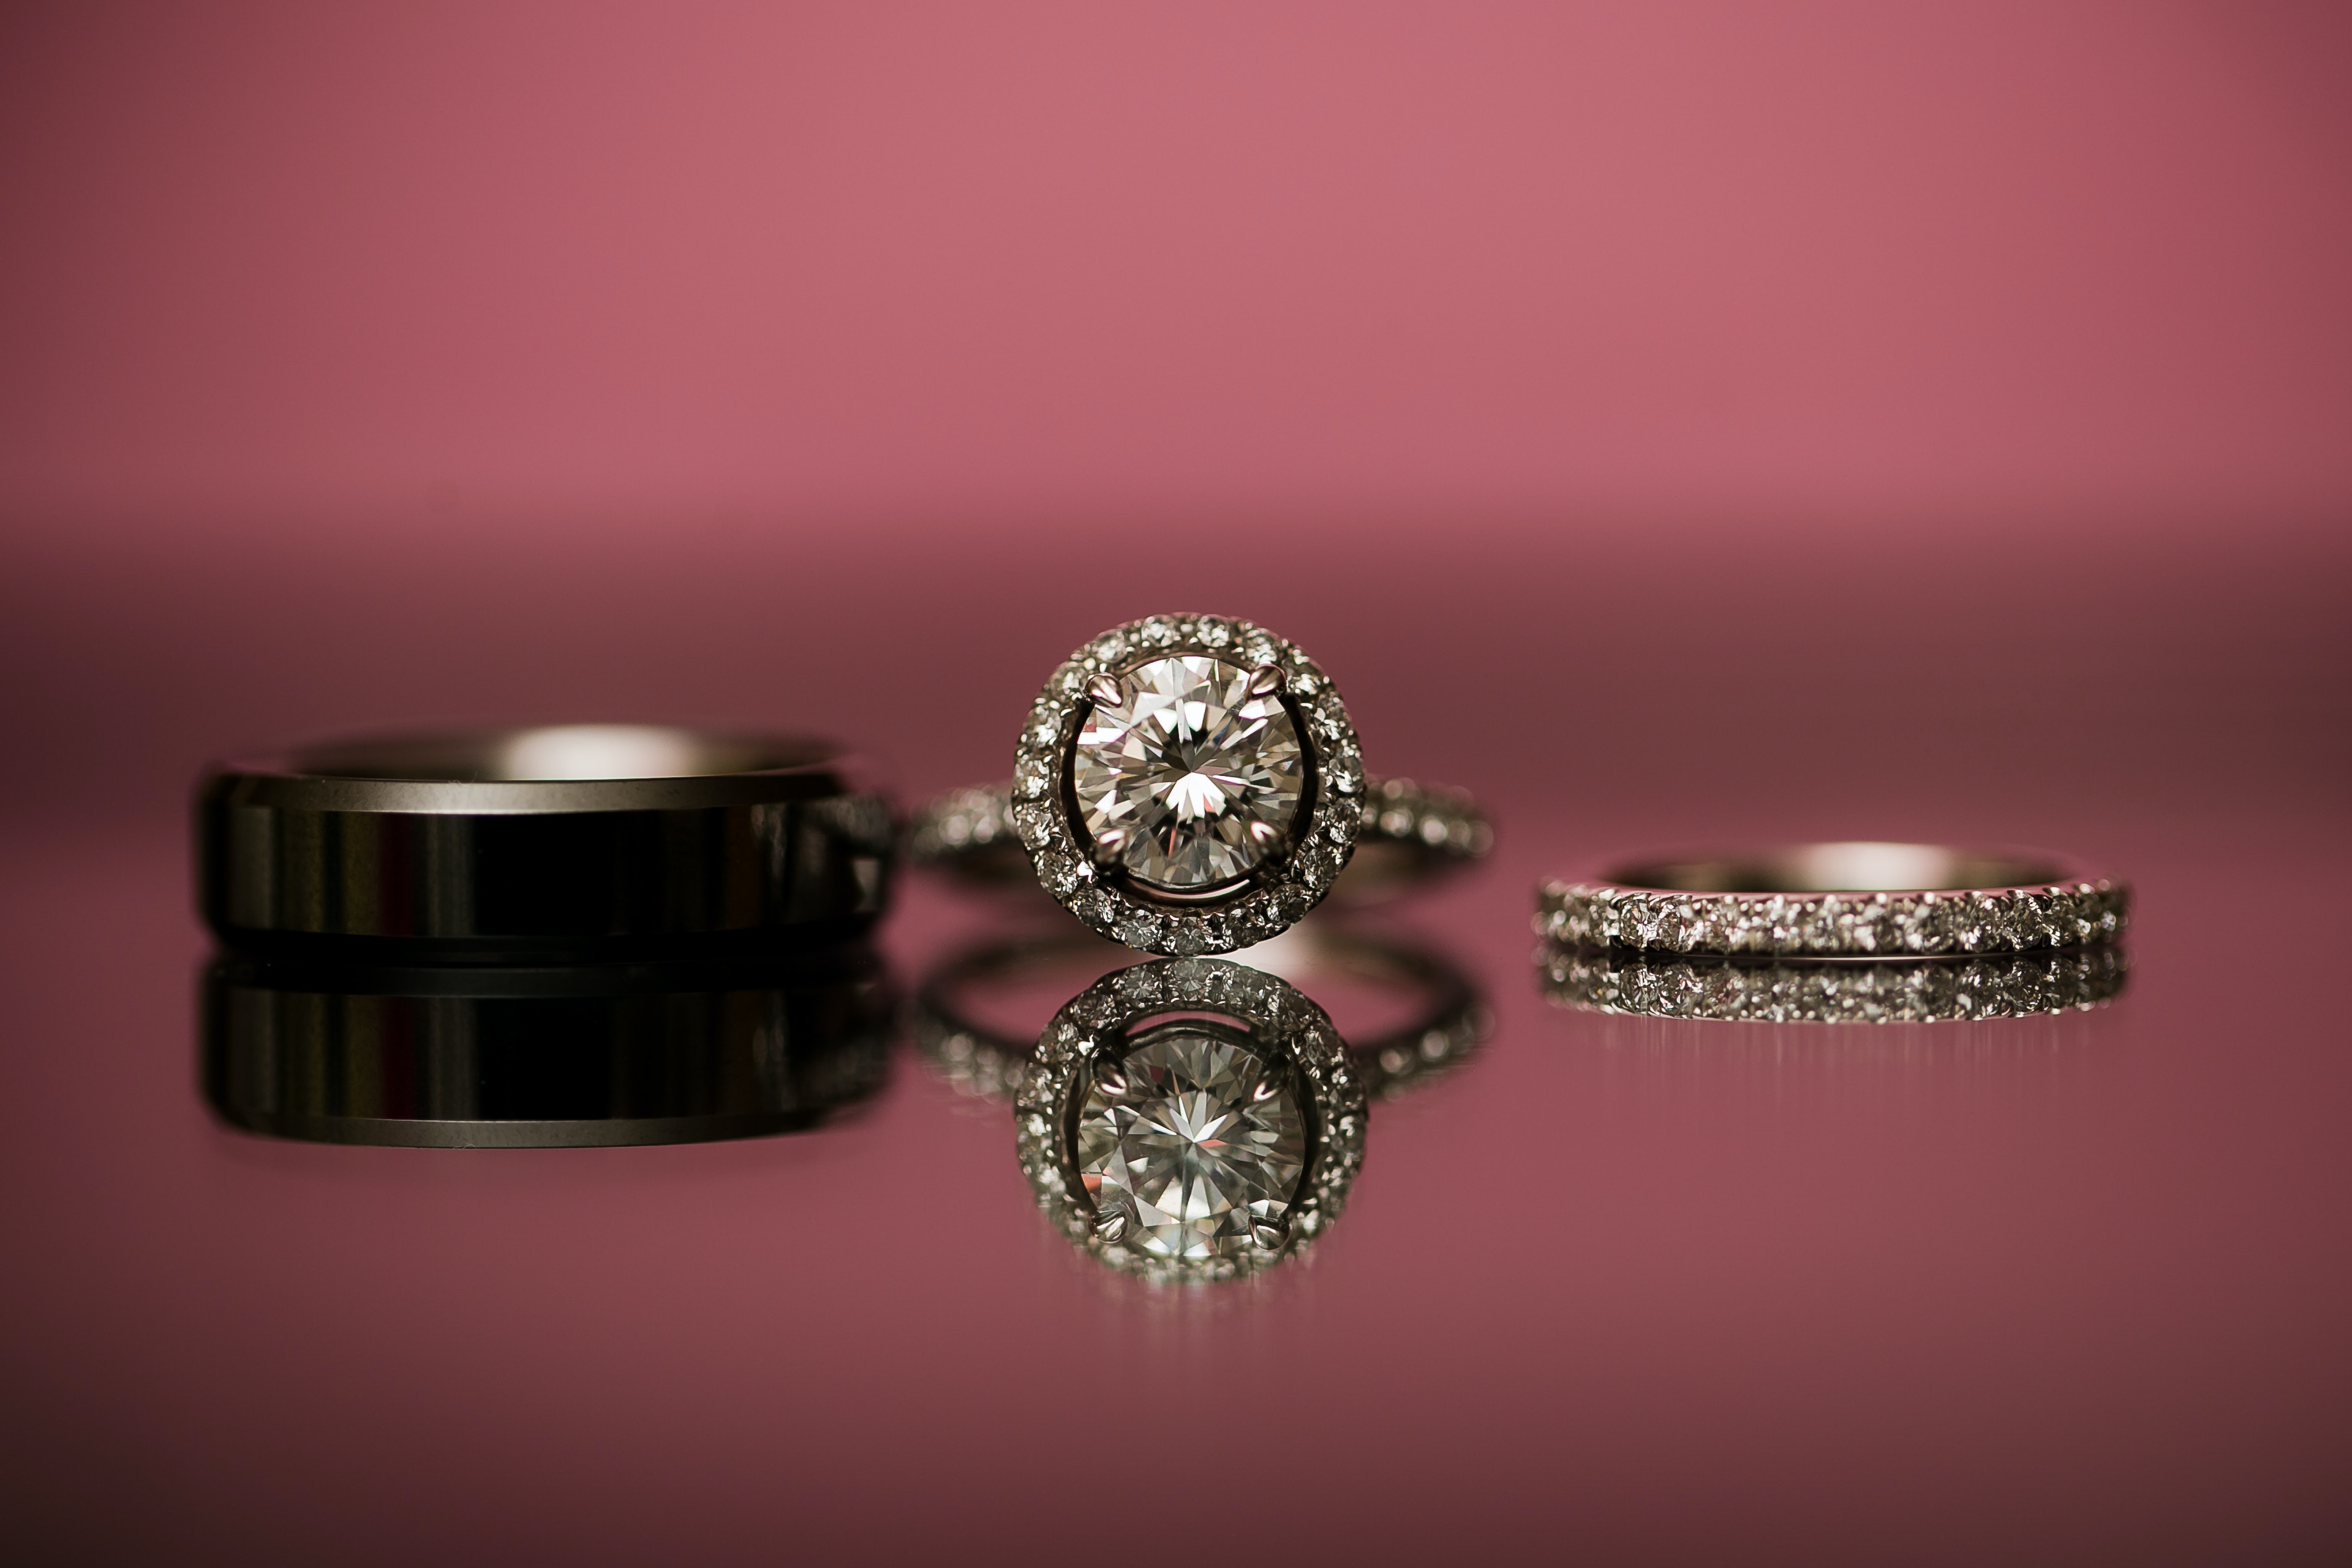 Ditch the Hitch: Reasons to Sell Your Engagement or Wedding Ring Now